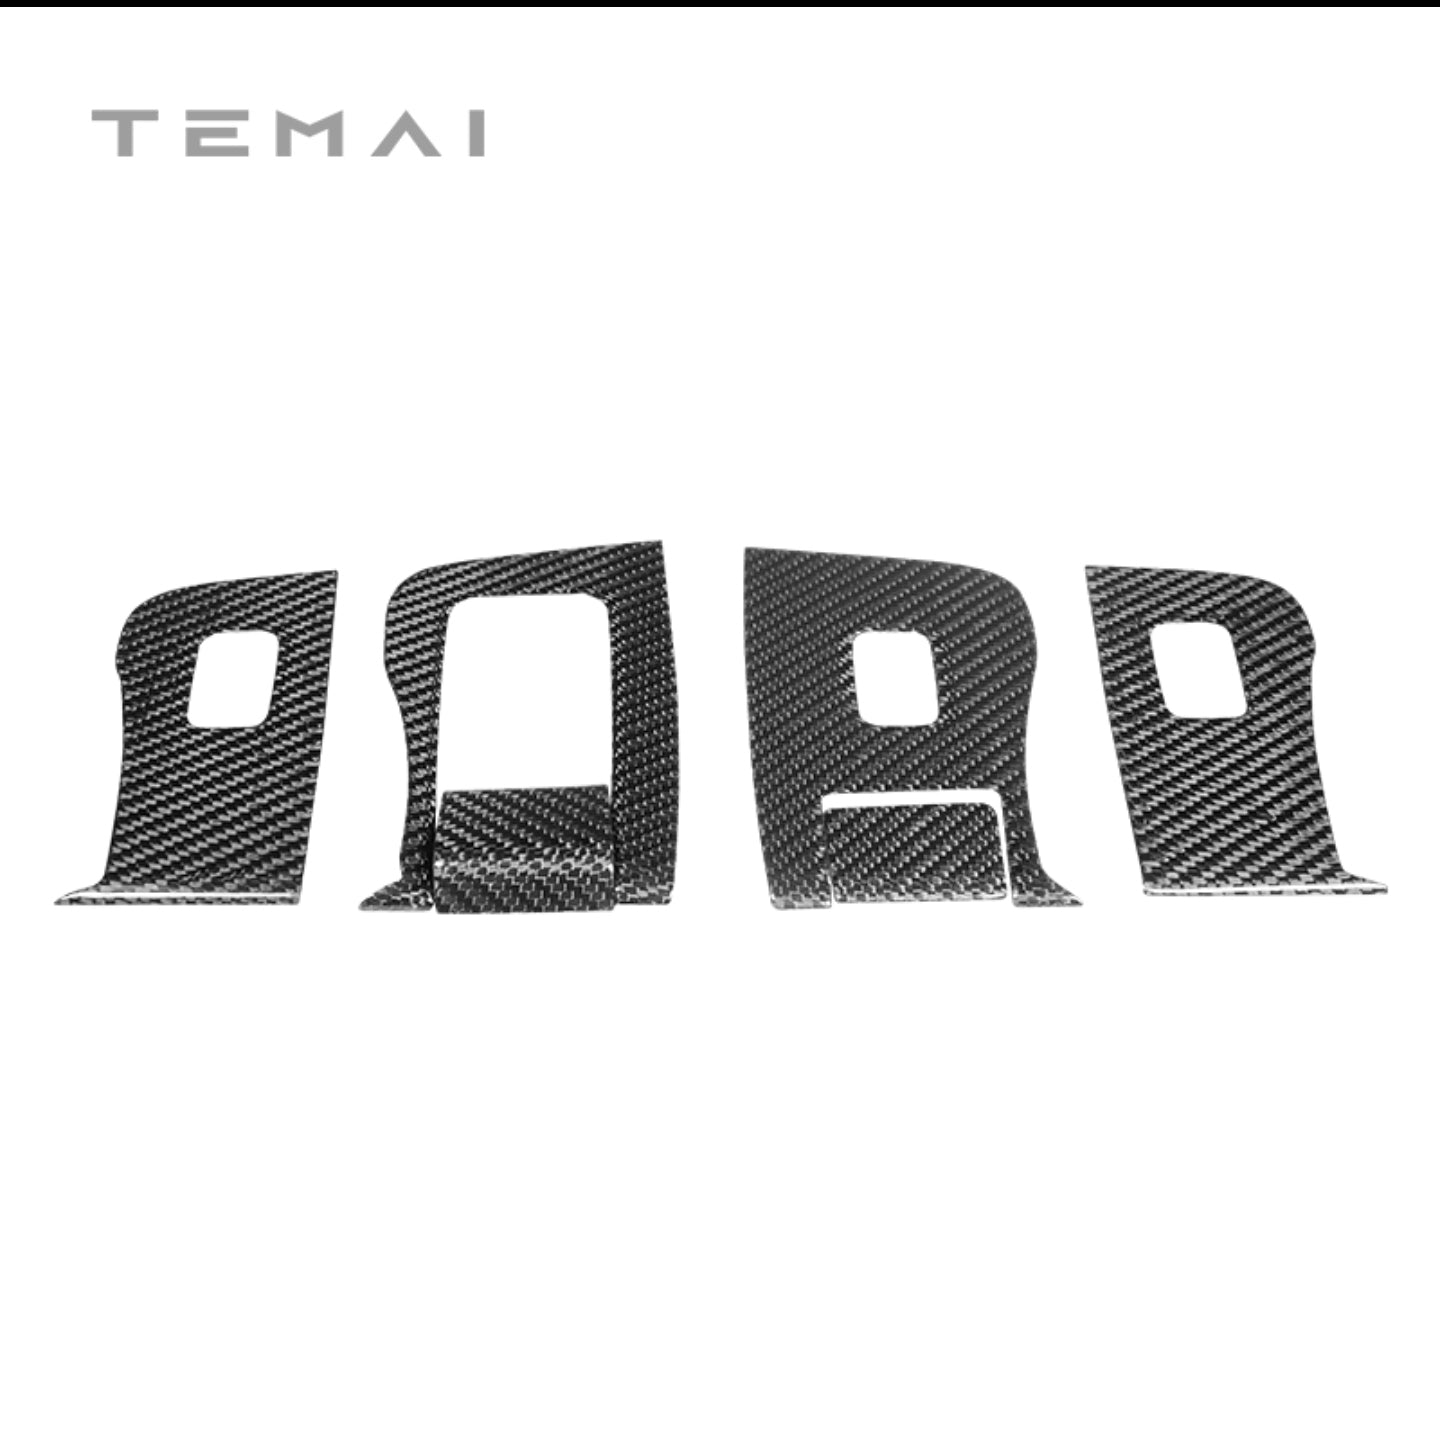 TEMAI INTERIOR TRIM WINDOW LIFTER SWITCH BUTTONS DECORATIVE FRAME COVER STICKERS FOR MODEL 3